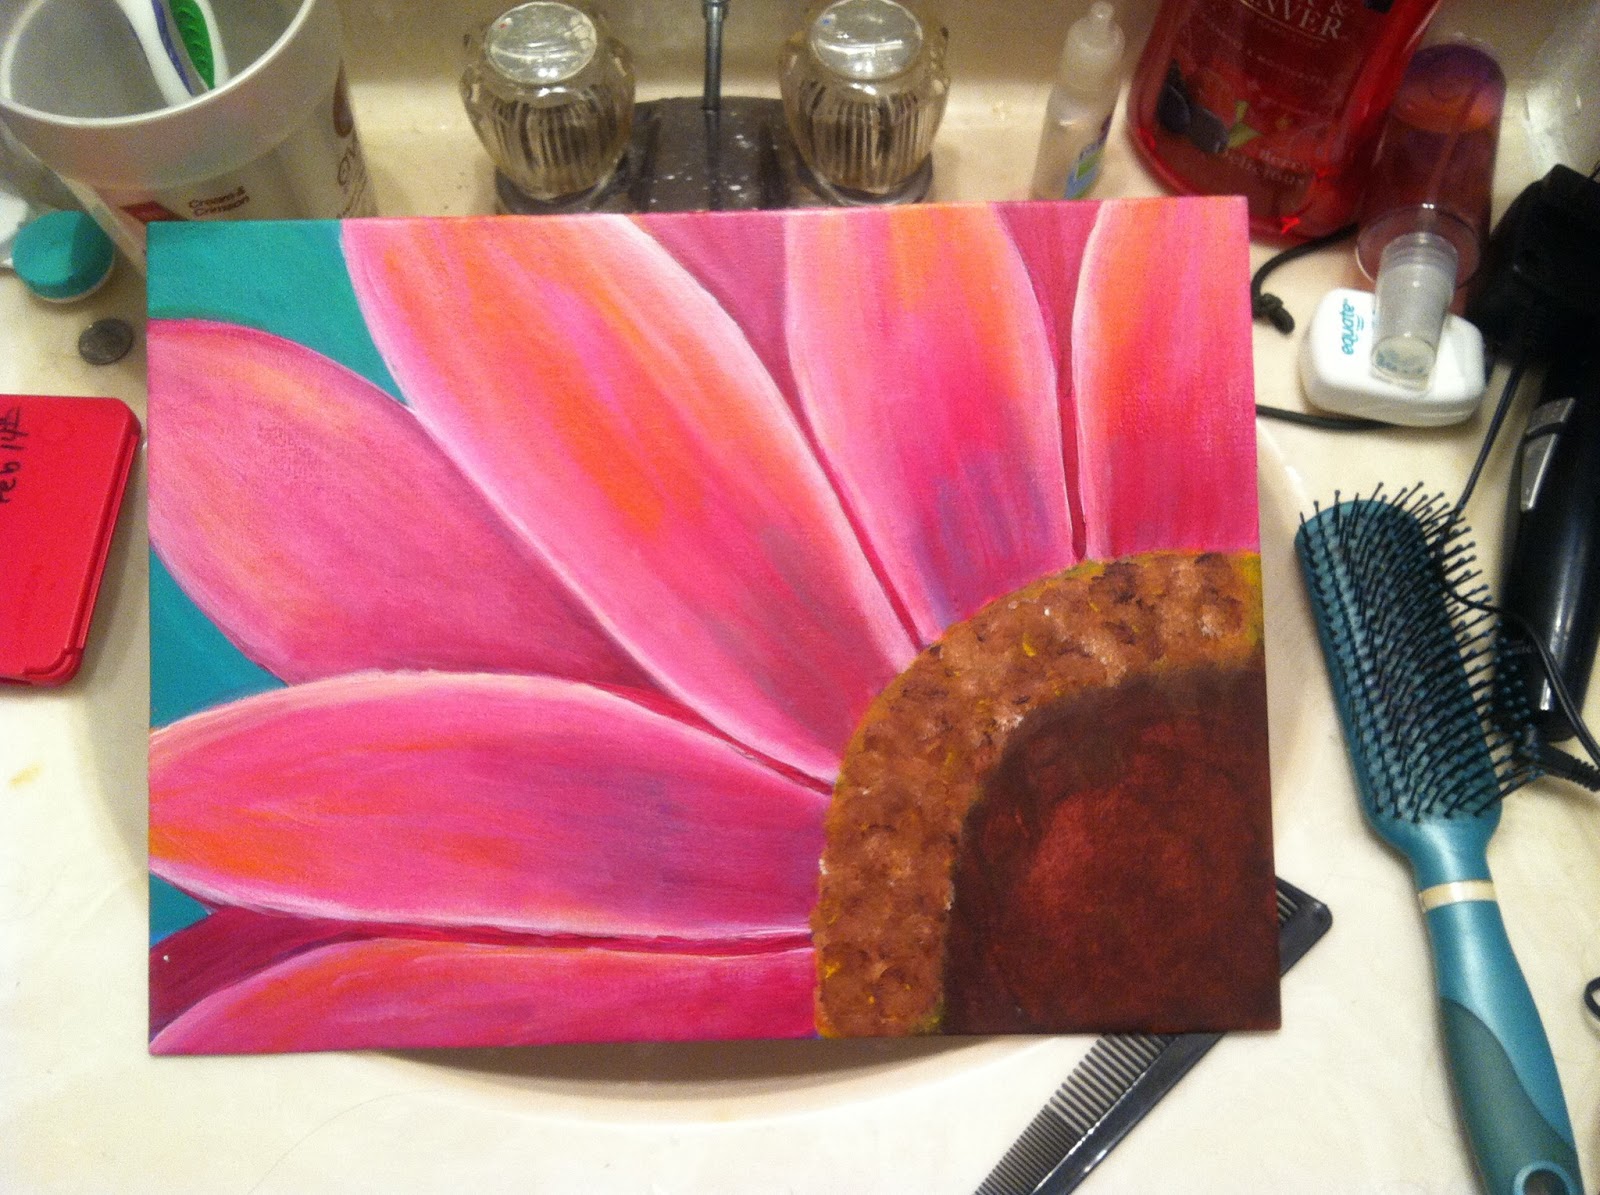 Angela Anderson Art Blog: Gerbera Daisy Painting Video - Submitted Artwork